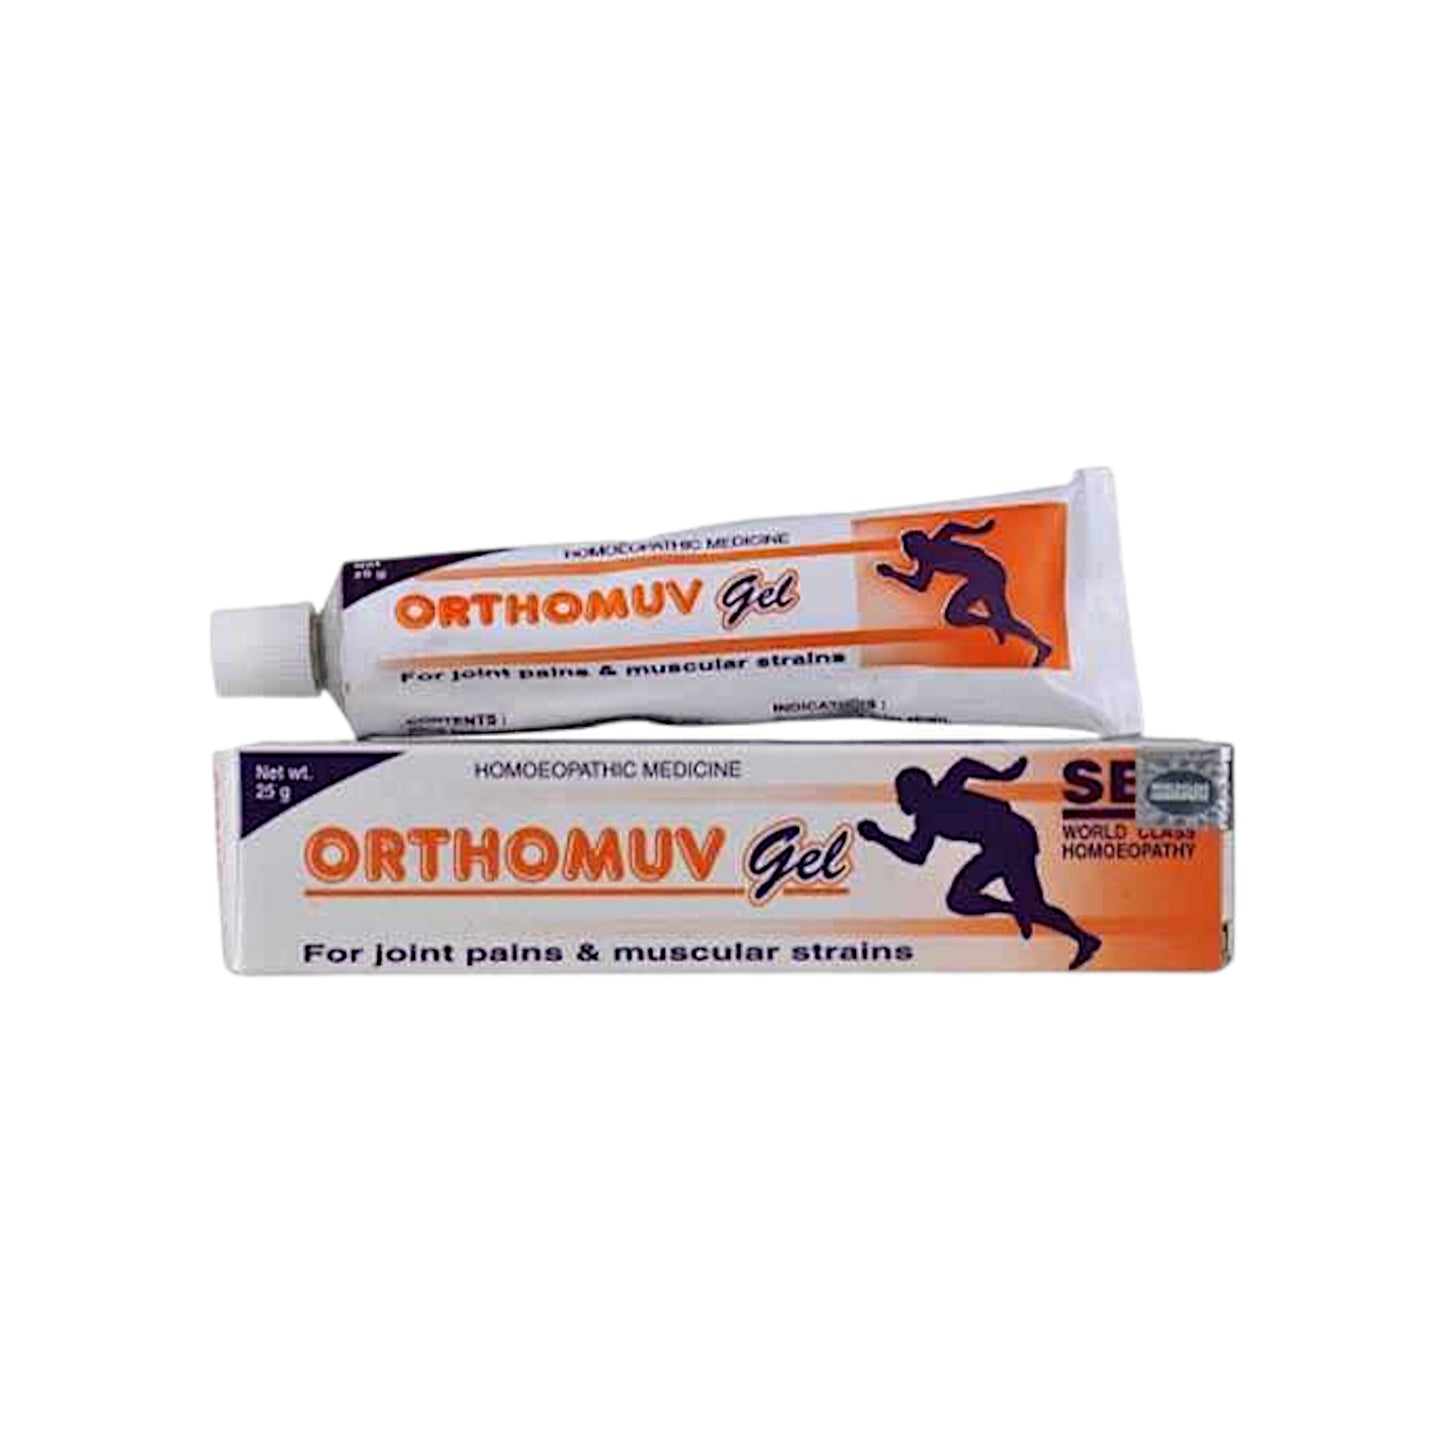 Image: SBL Orthomuv Ge 25 gl - Homeopathic Relief for Joint Pain and Injuries.